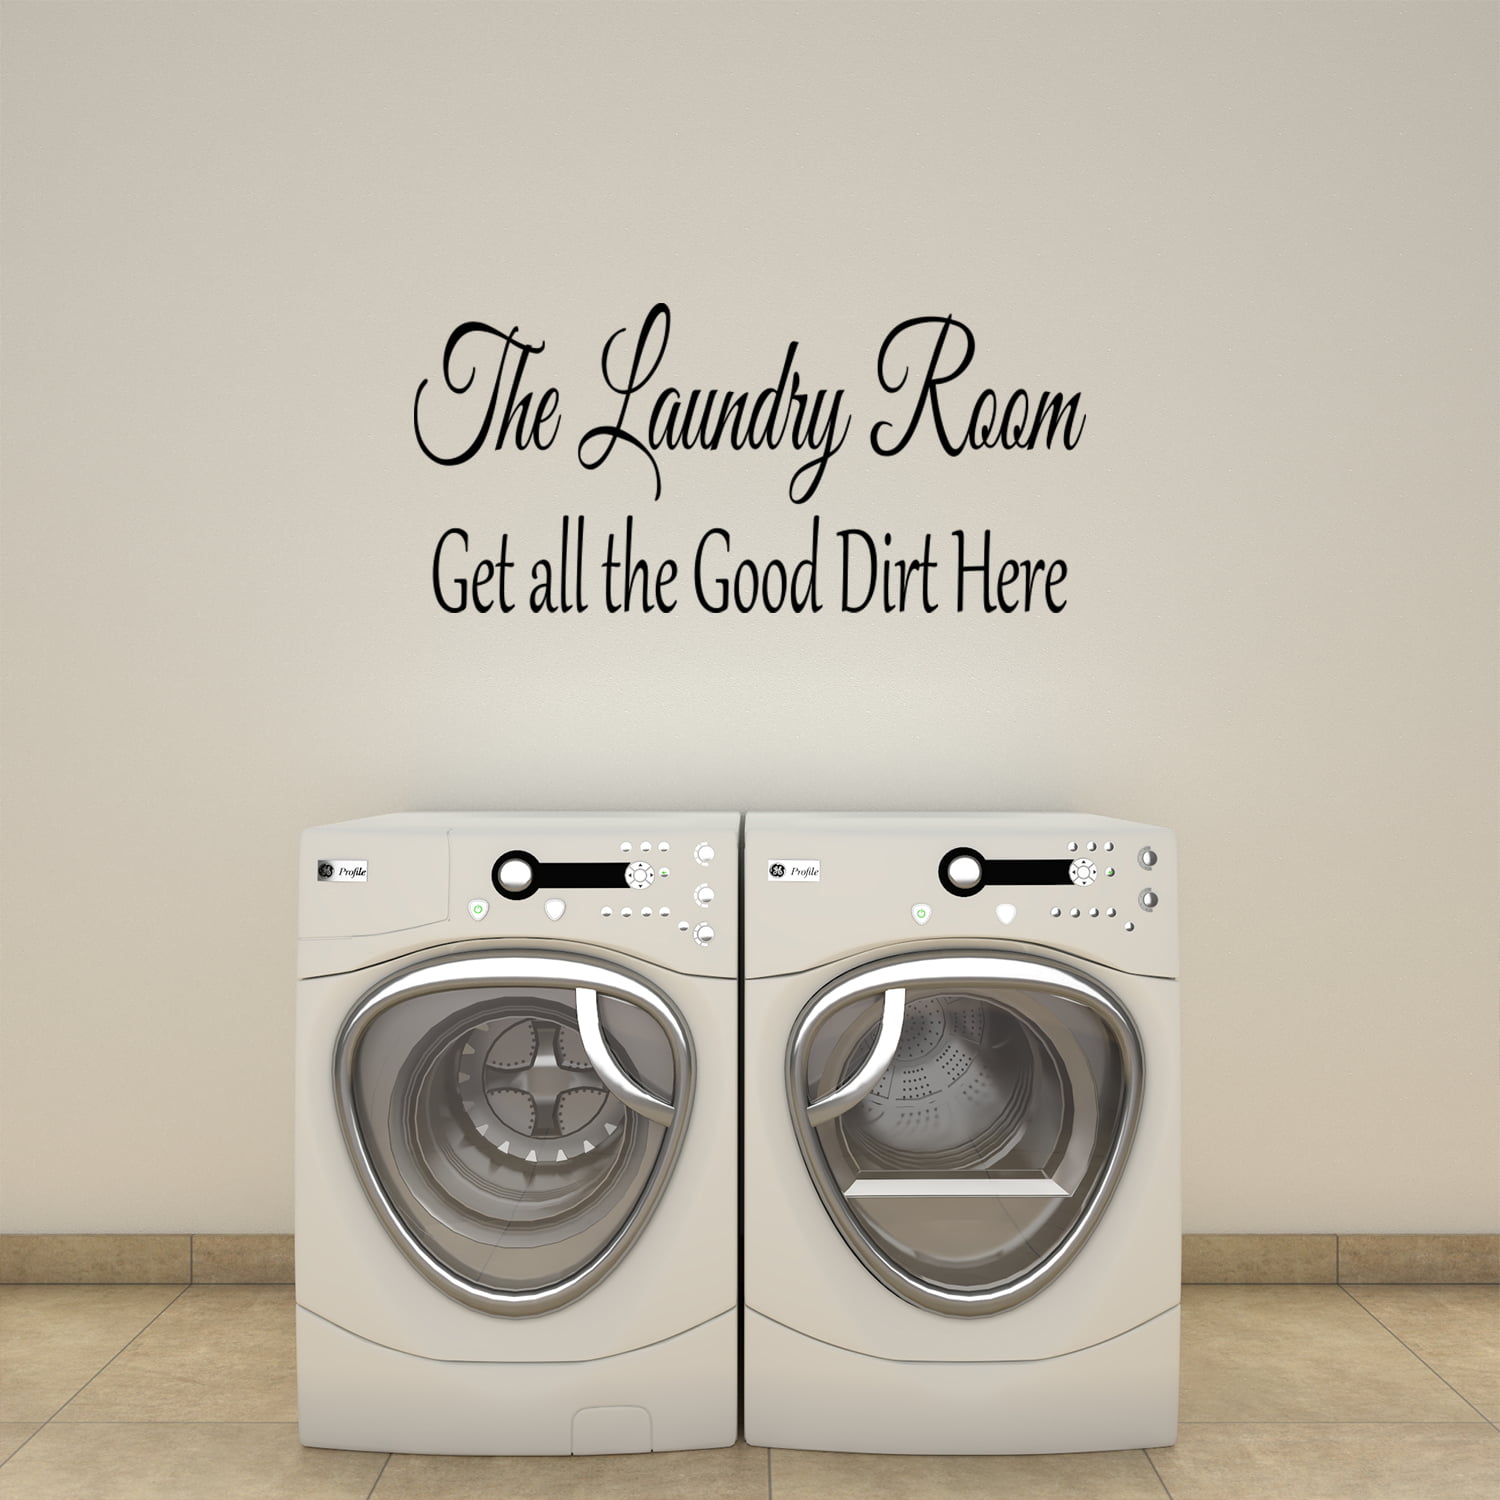 Laundry Drop Your Drawers Here Word Wall Decal Vinyl Decor Sticker Laundry Room 